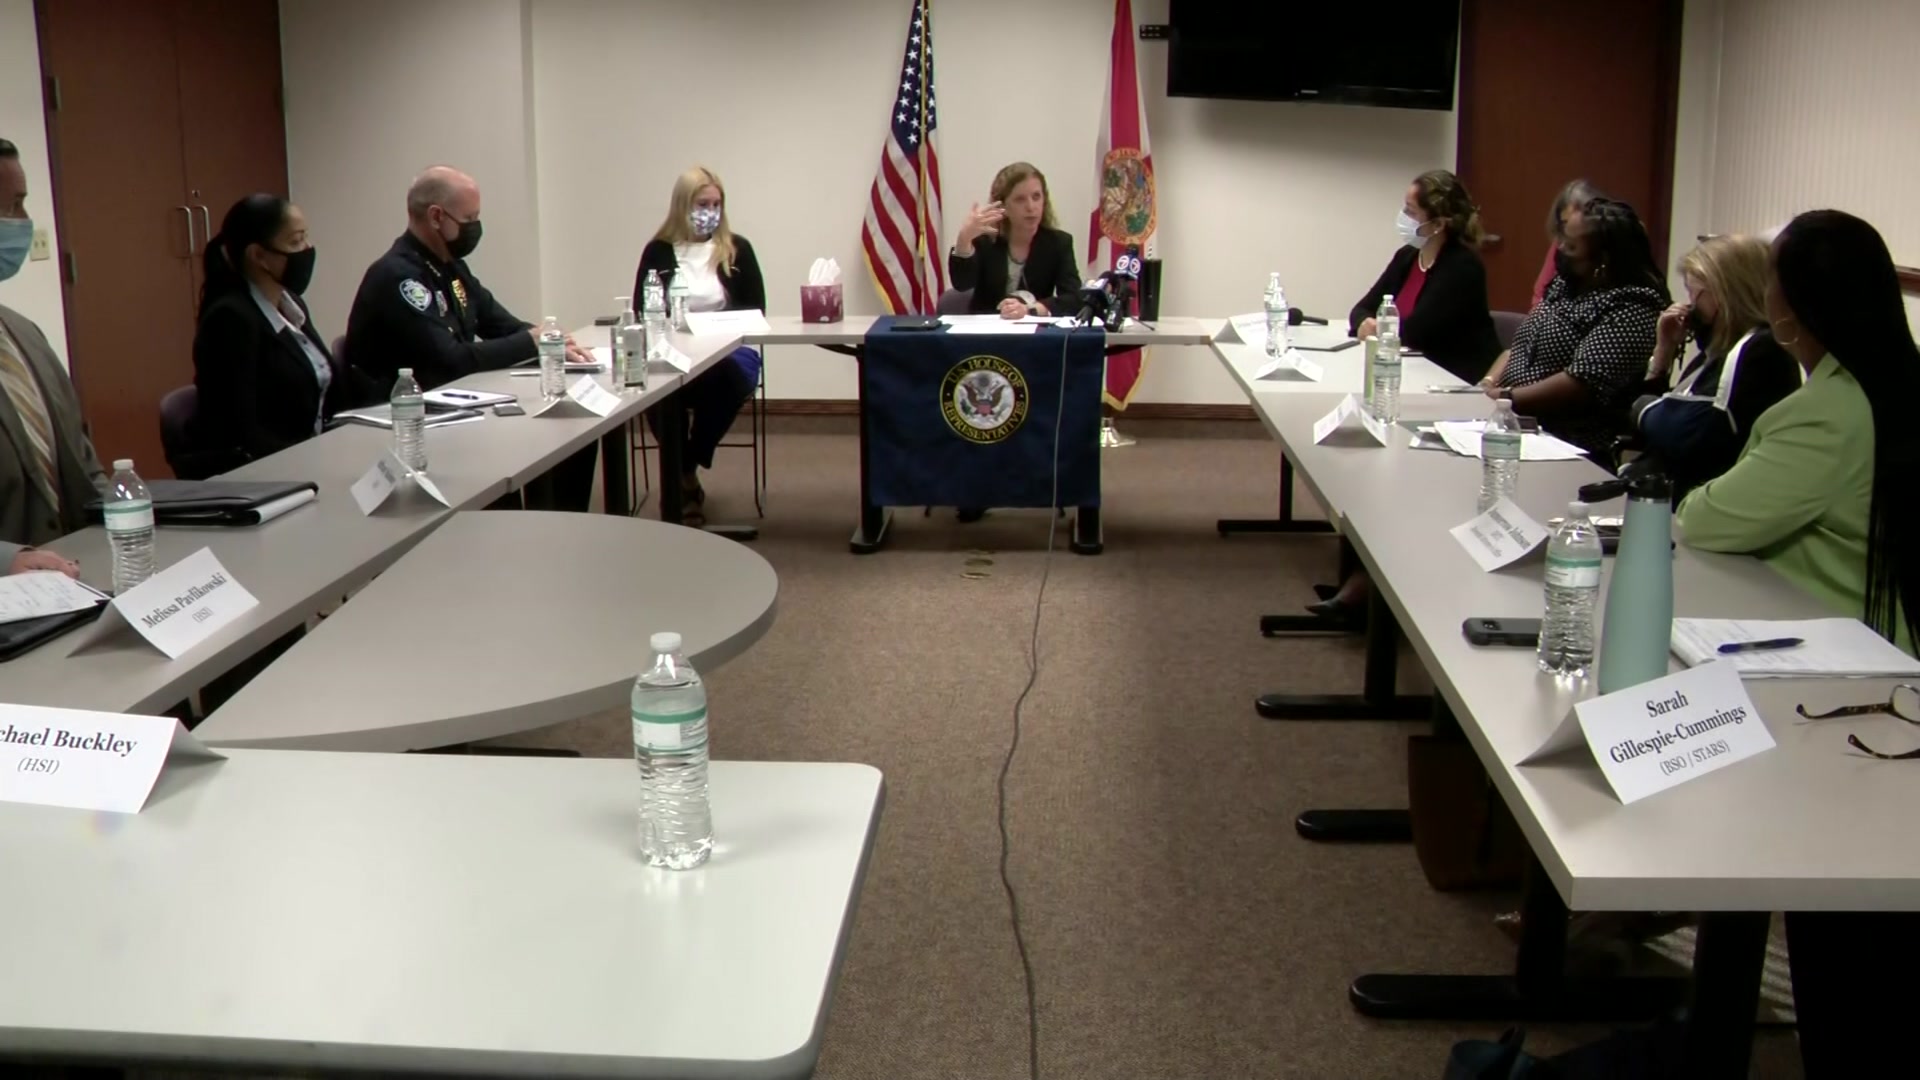 Rep. Wasserman Schultz Meets With Human Trafficking Prevention Advocates To Raise Public Awareness